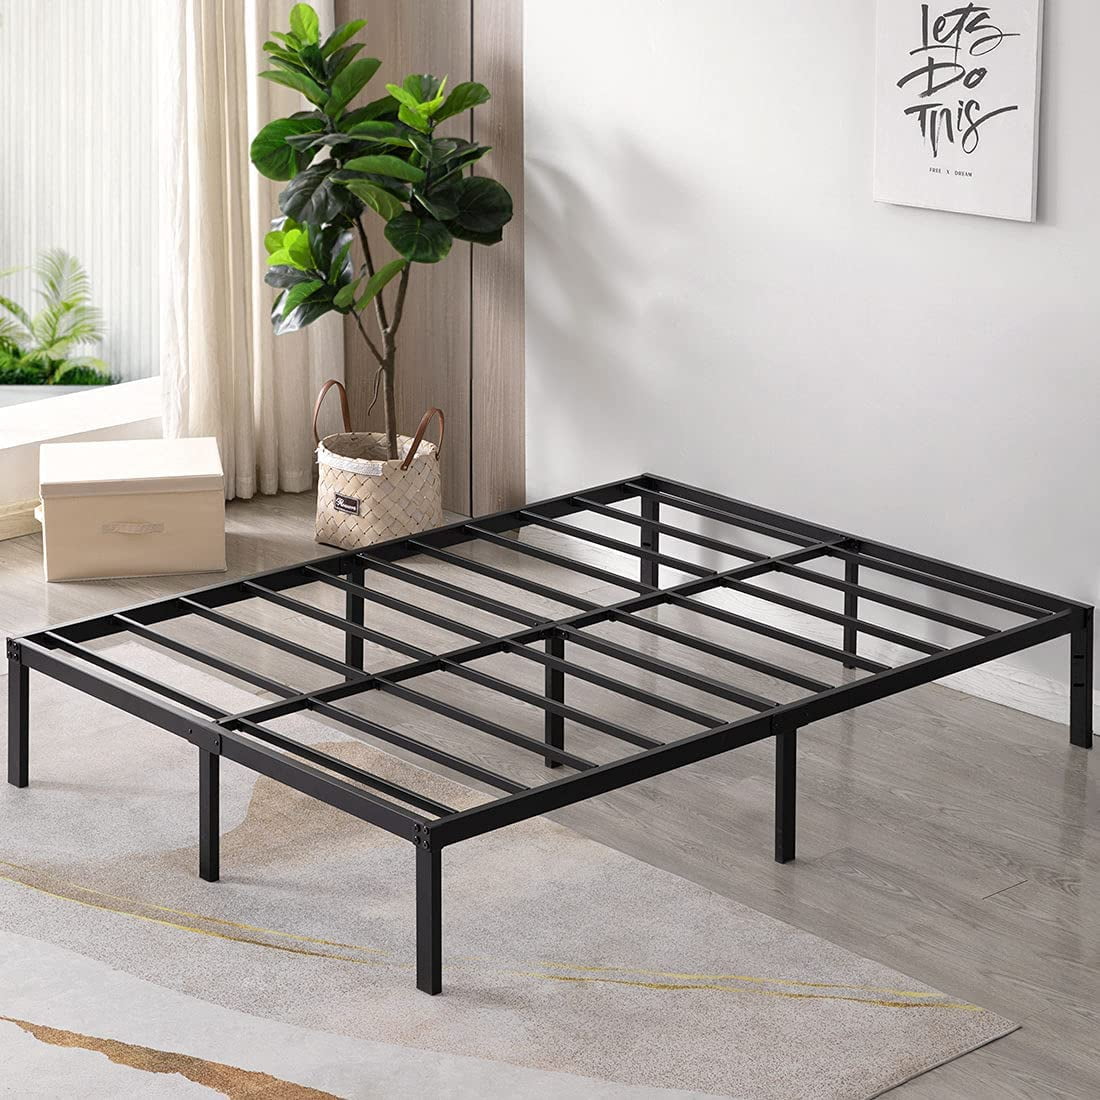 Heavy Duty Queen Metal Bed Frame, 18 Inch Metal Bed Frame